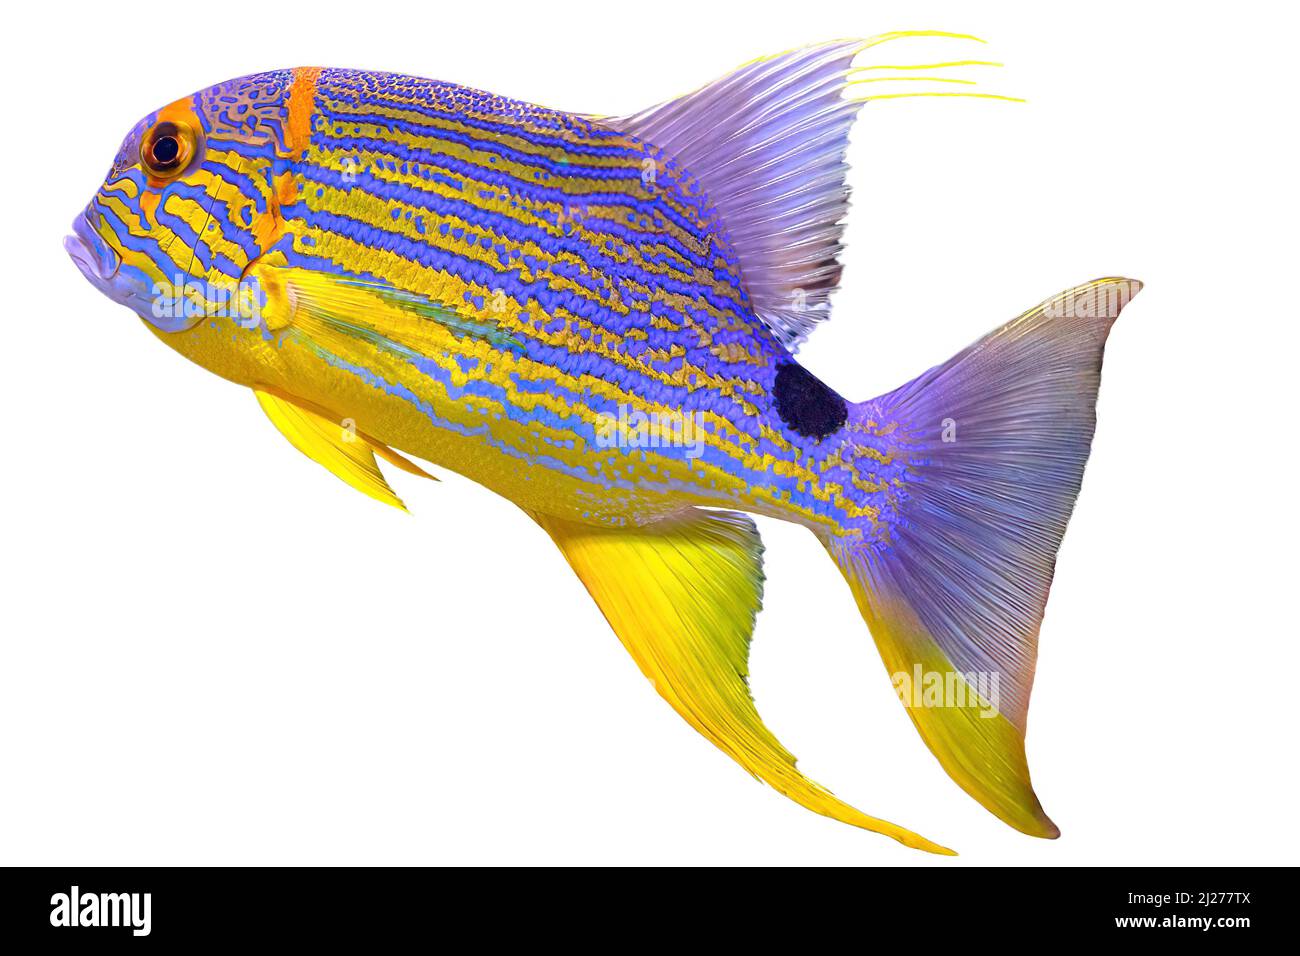 a Sailfin snapper fish or blue-lined sea bream isolated on white background. Symphorichthys spilurus species living in Indian Ocean and western Stock Photo